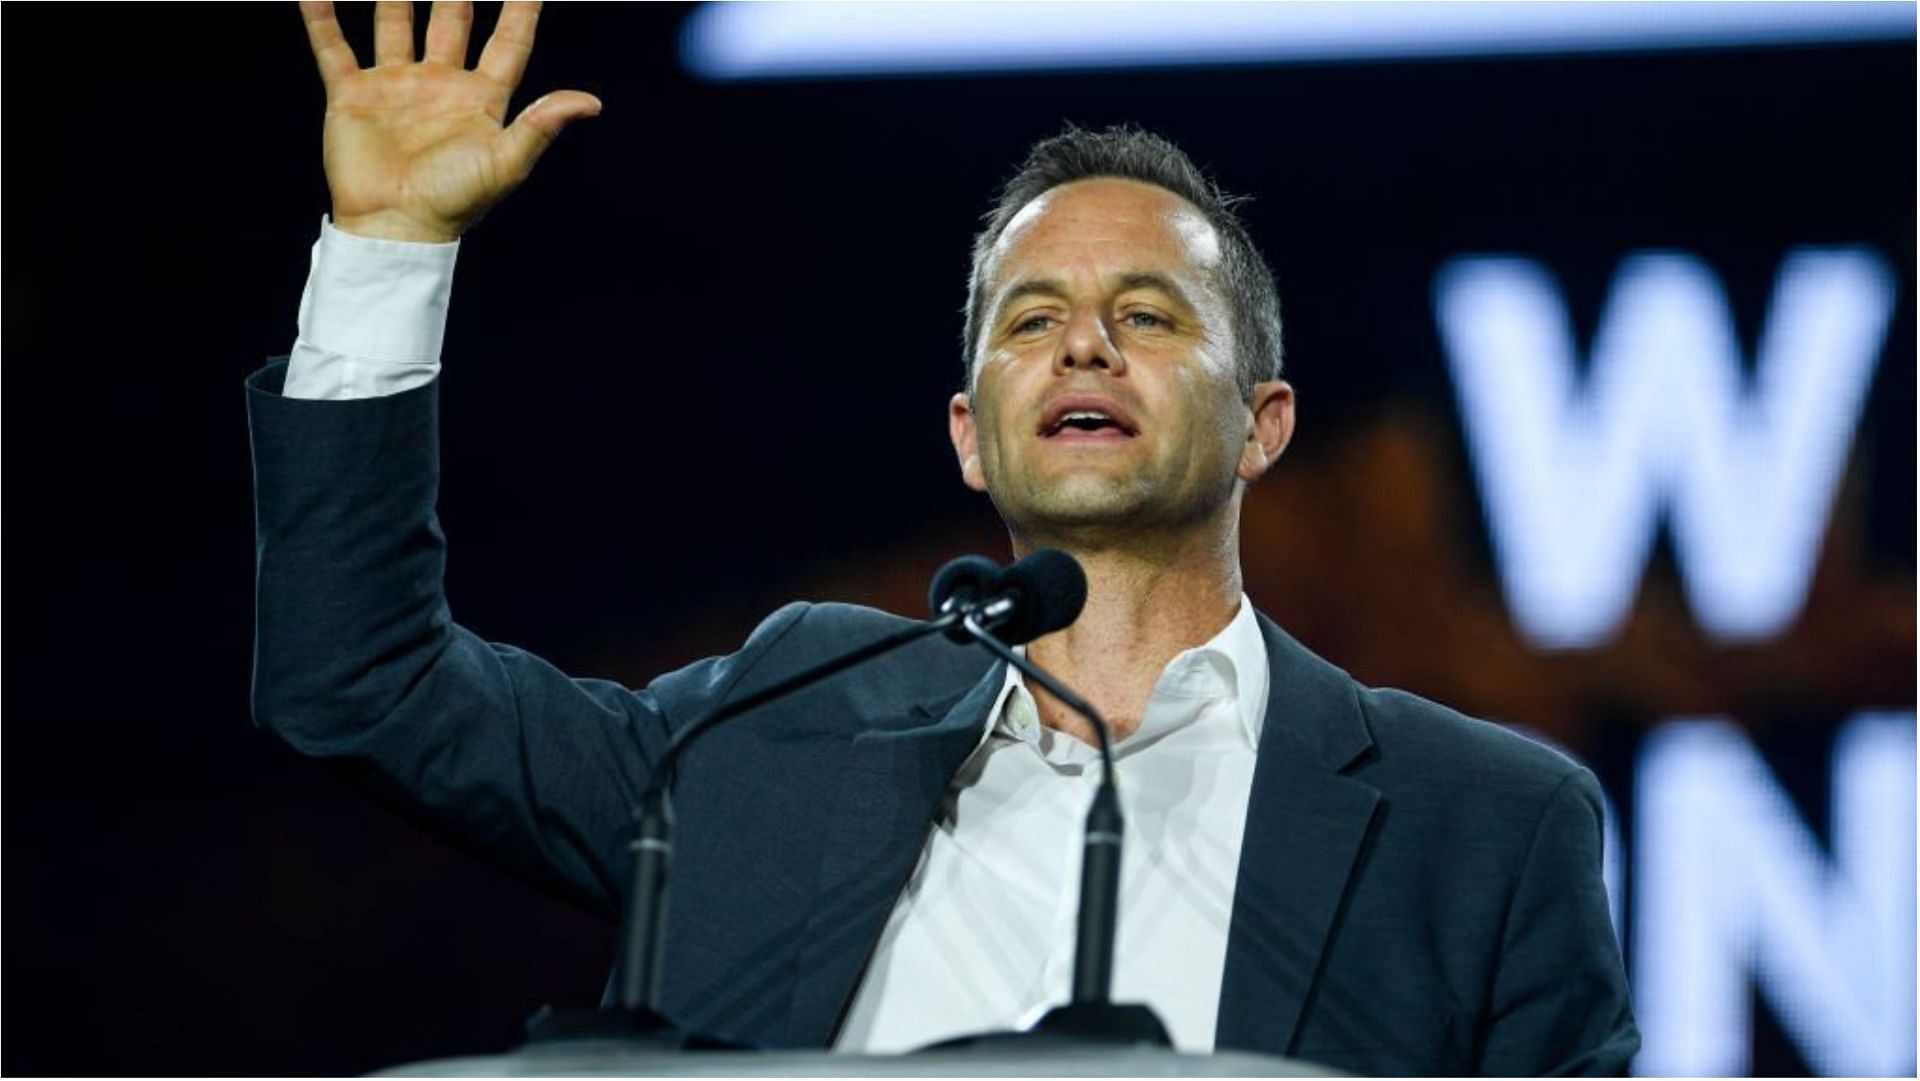 Kirk Cameron accumulated a lot of wealth from his career in the entertainment industry (Image via AAron Ontiveroz/Getty Images)